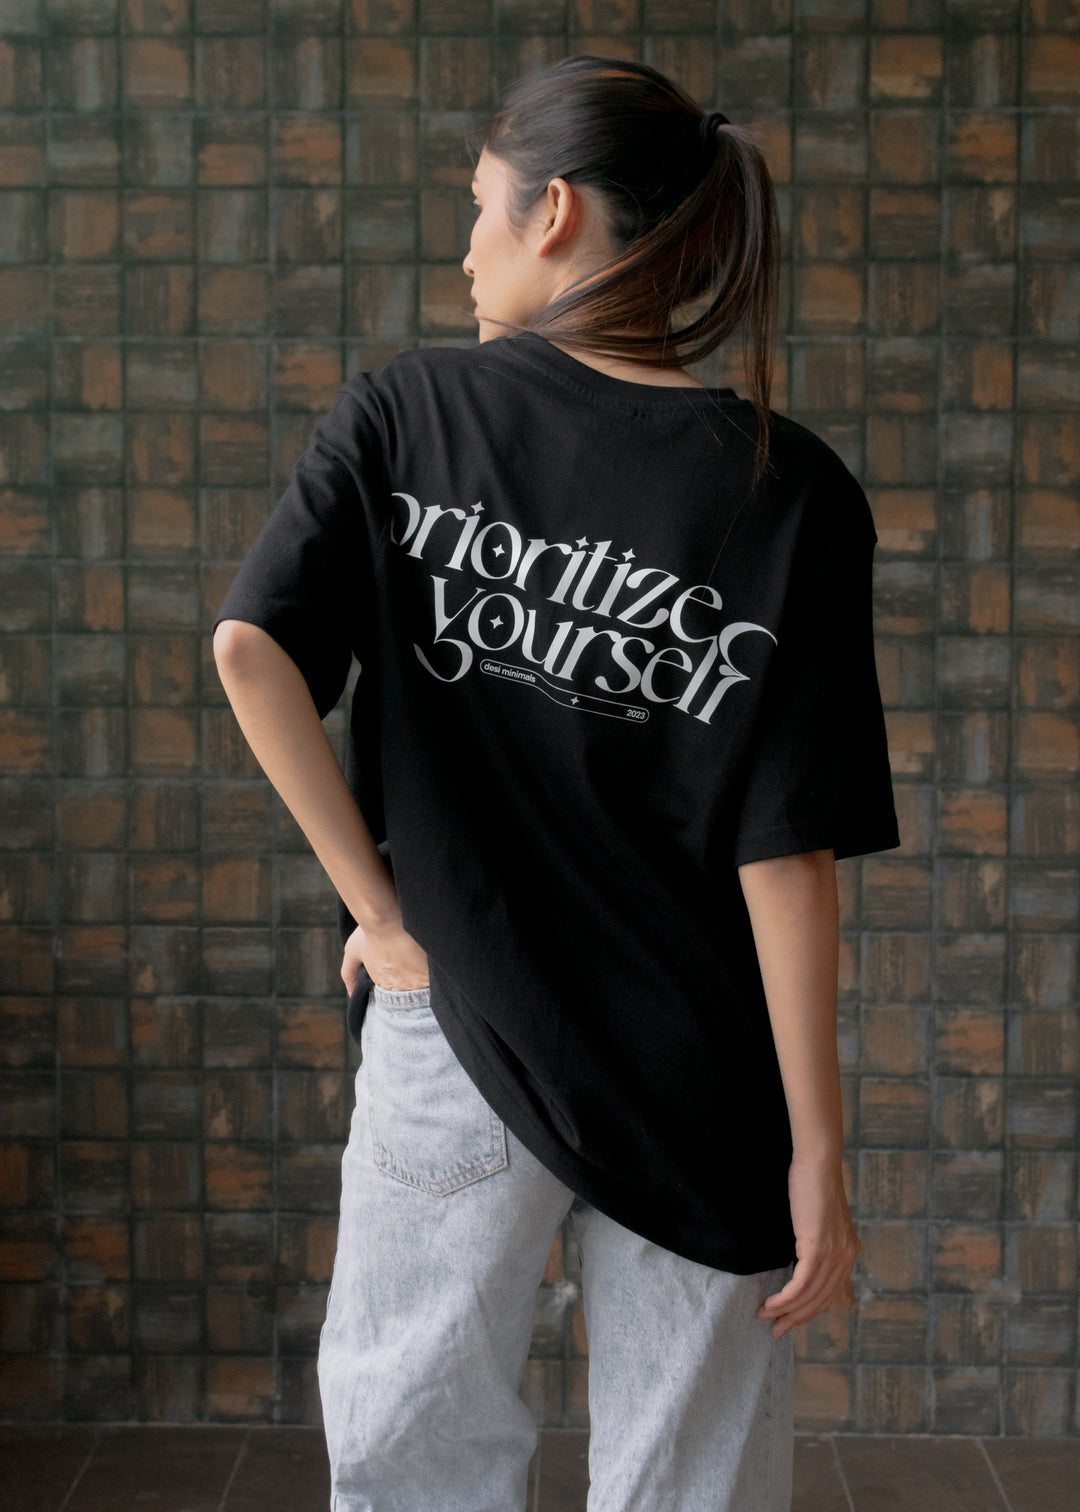 Prioritize Yourself — Black T-Shirt